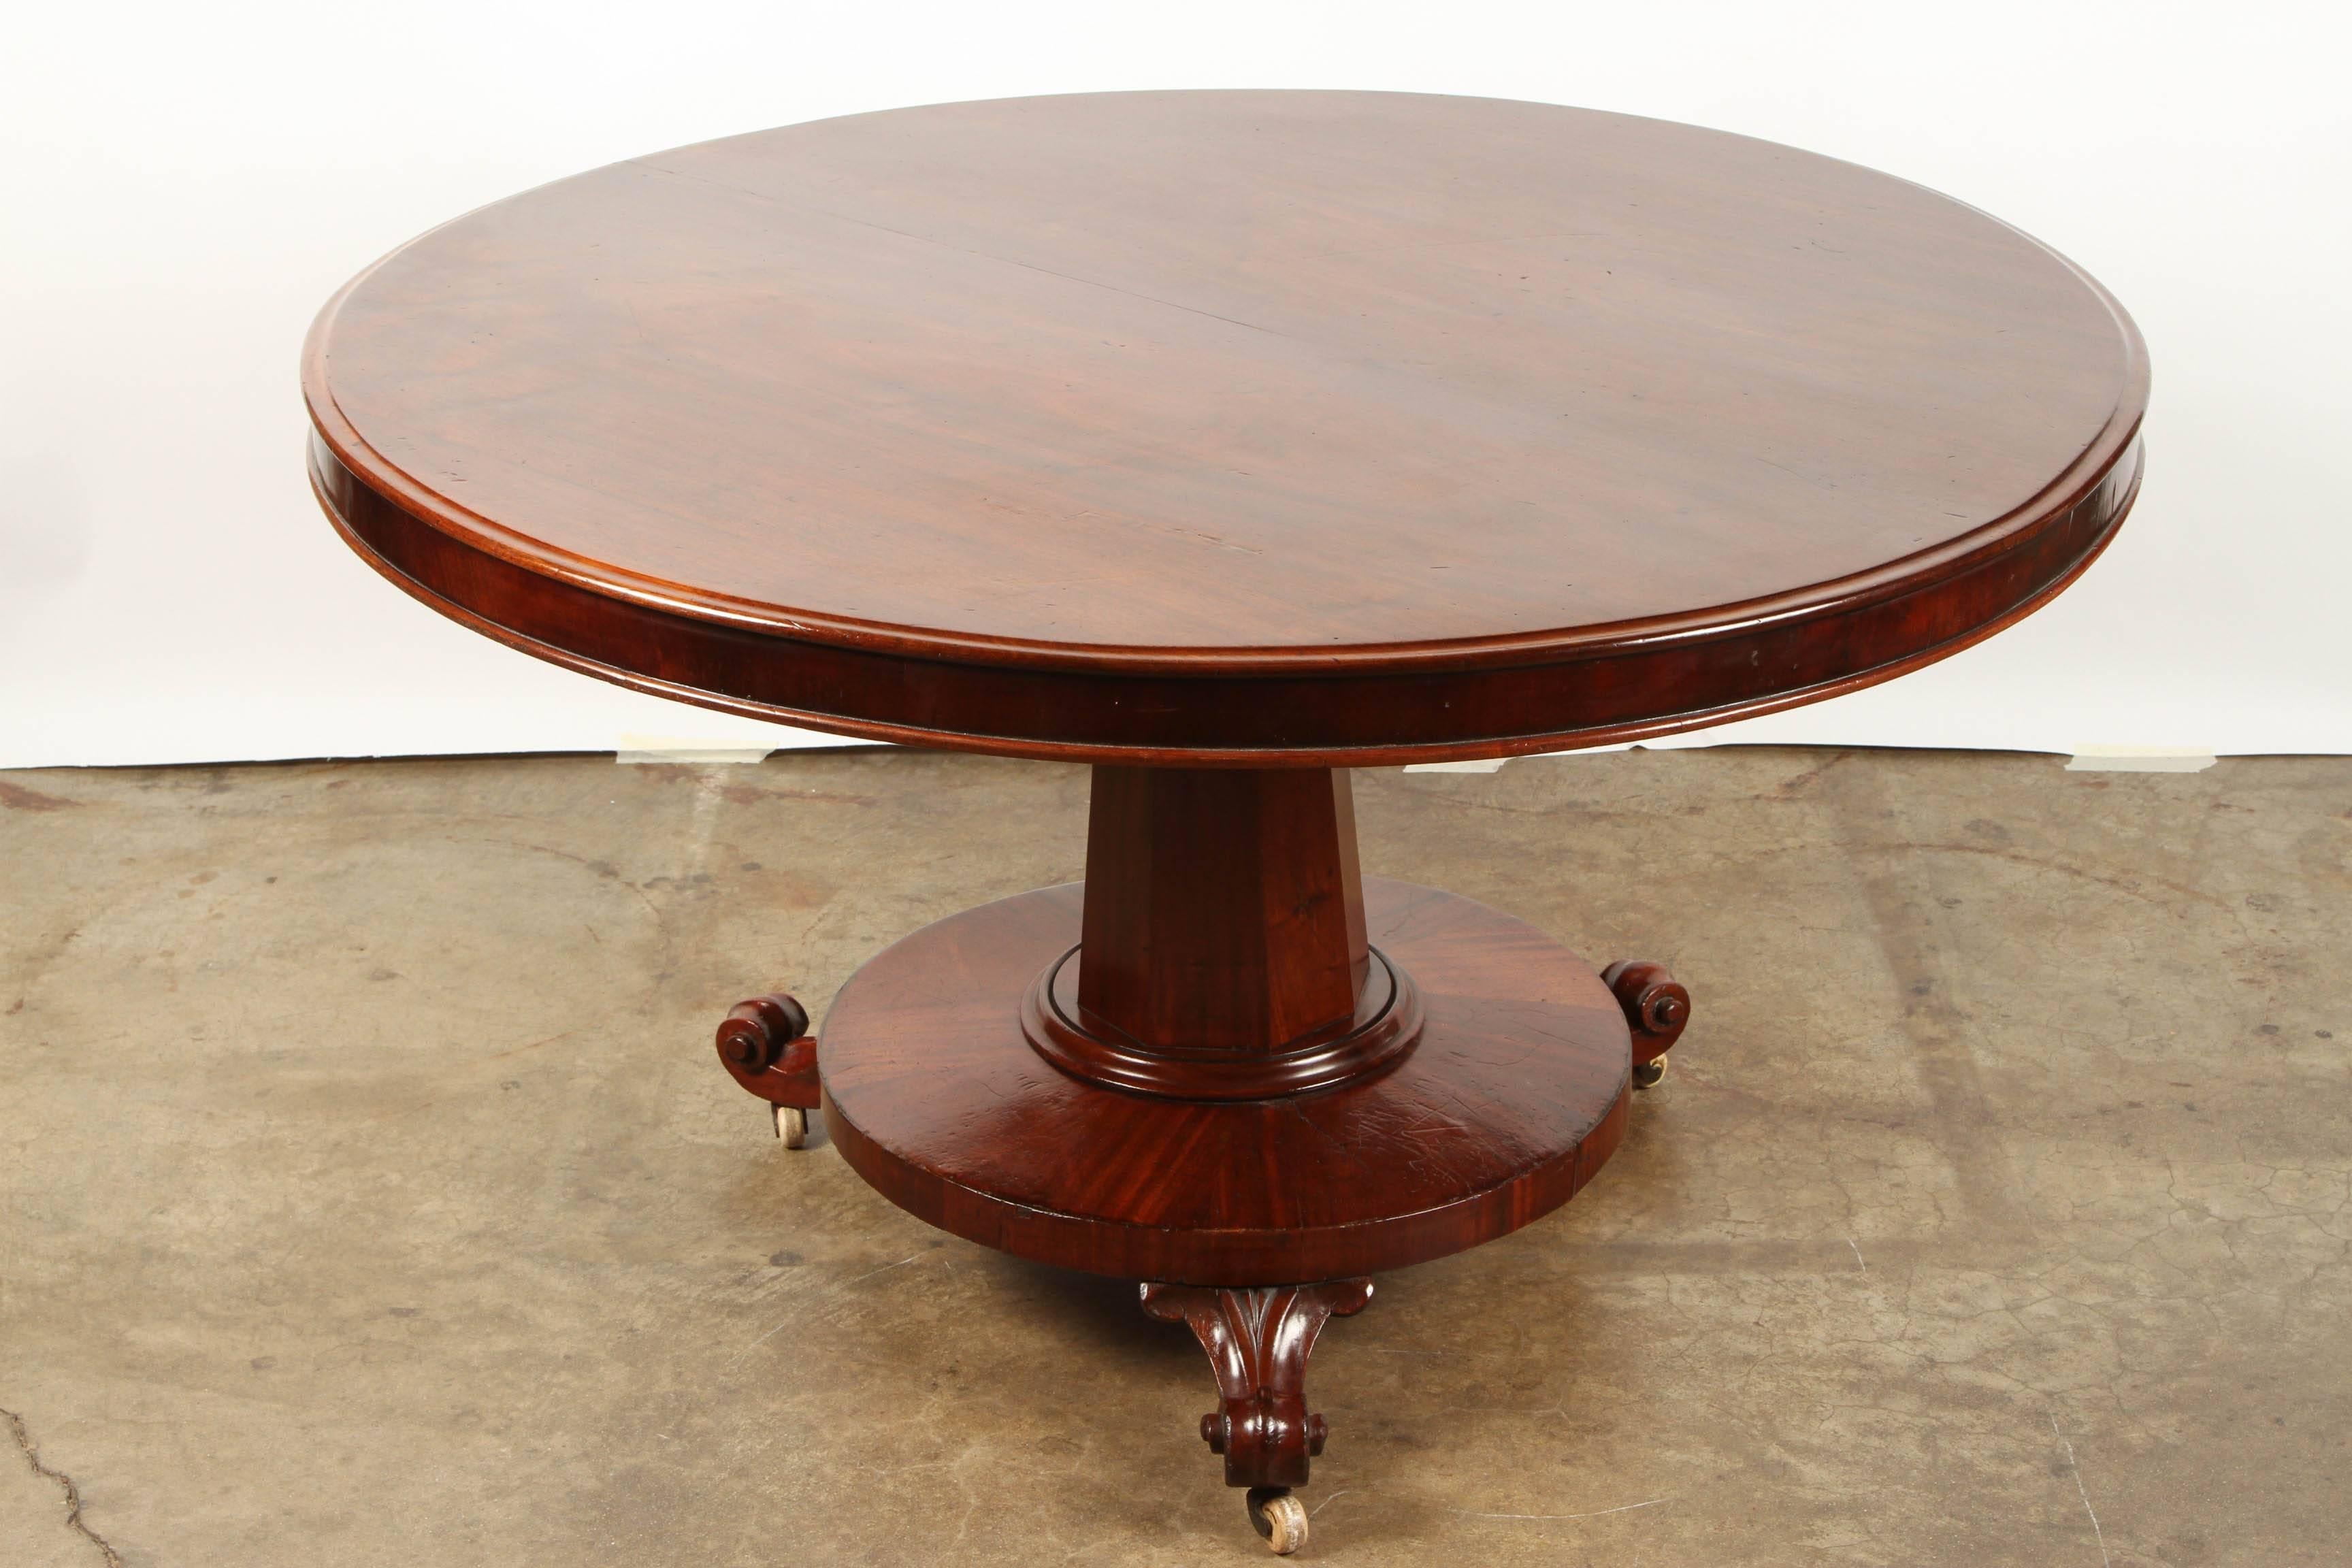 Beautiful Mahogany tilt top pedestal table from the Regency period. The table has an 8 sided pedestal and a round skirt, on 3 scroll feet. Each of the scroll feet is fitted with wheels for rolling.   The table top tilts to one side for easier